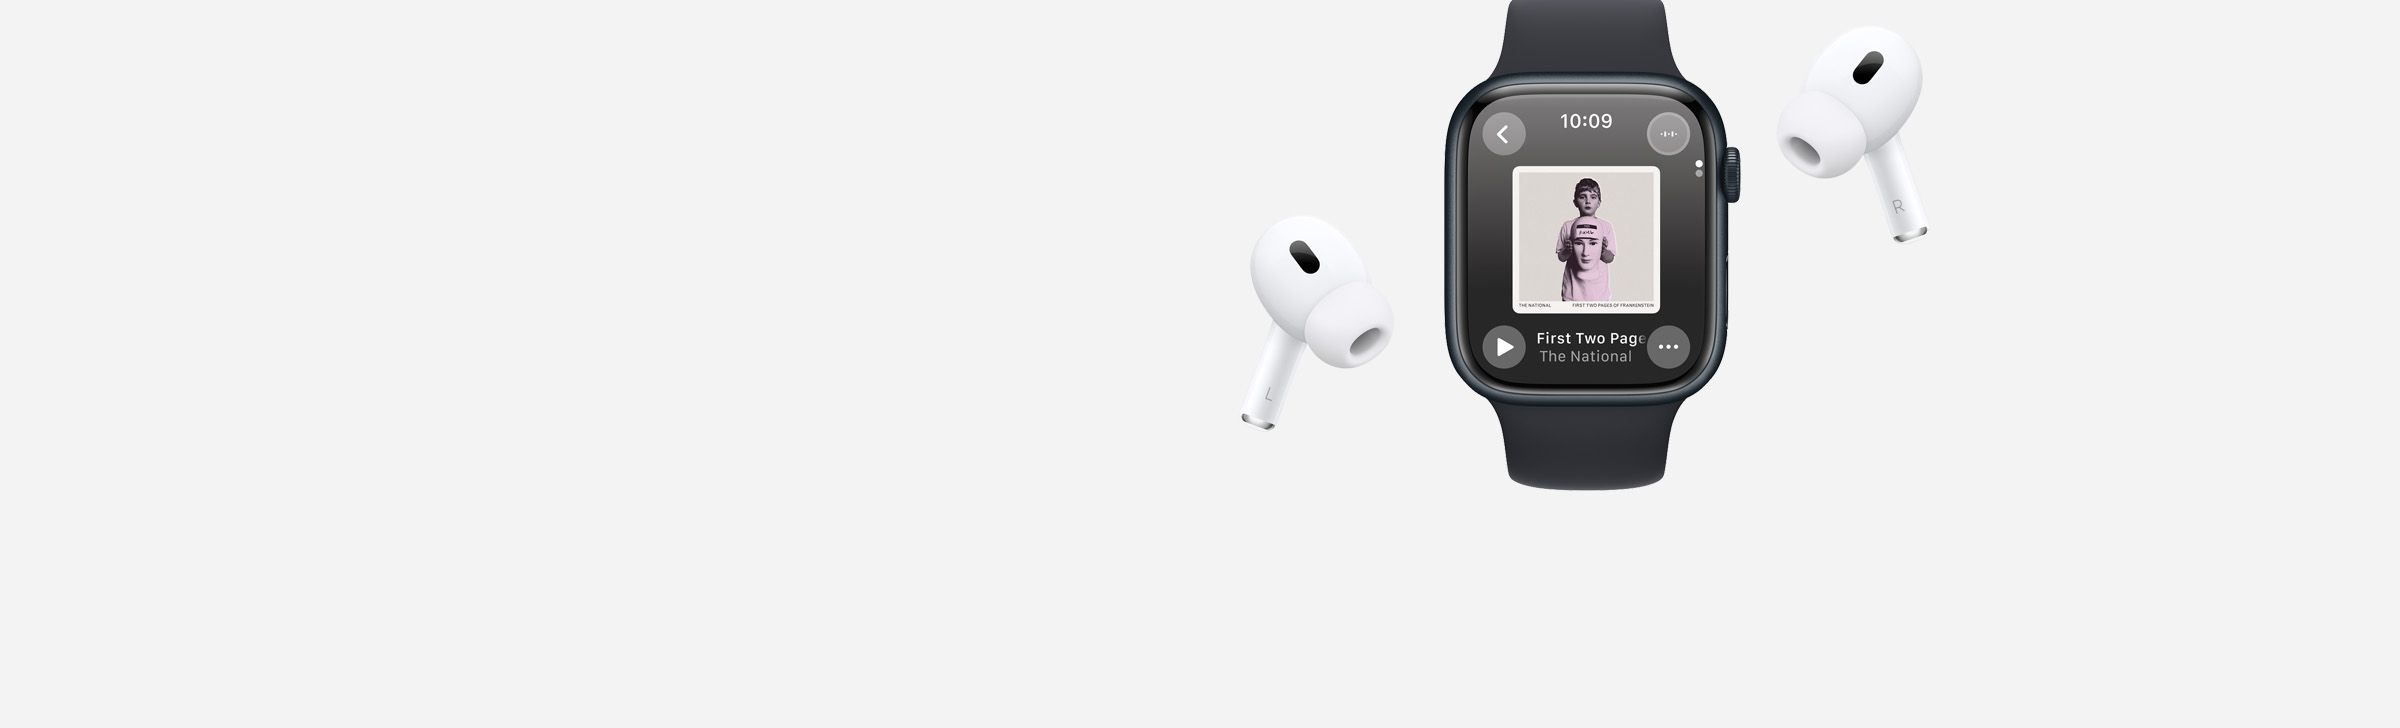 Apple Watch and Airpods